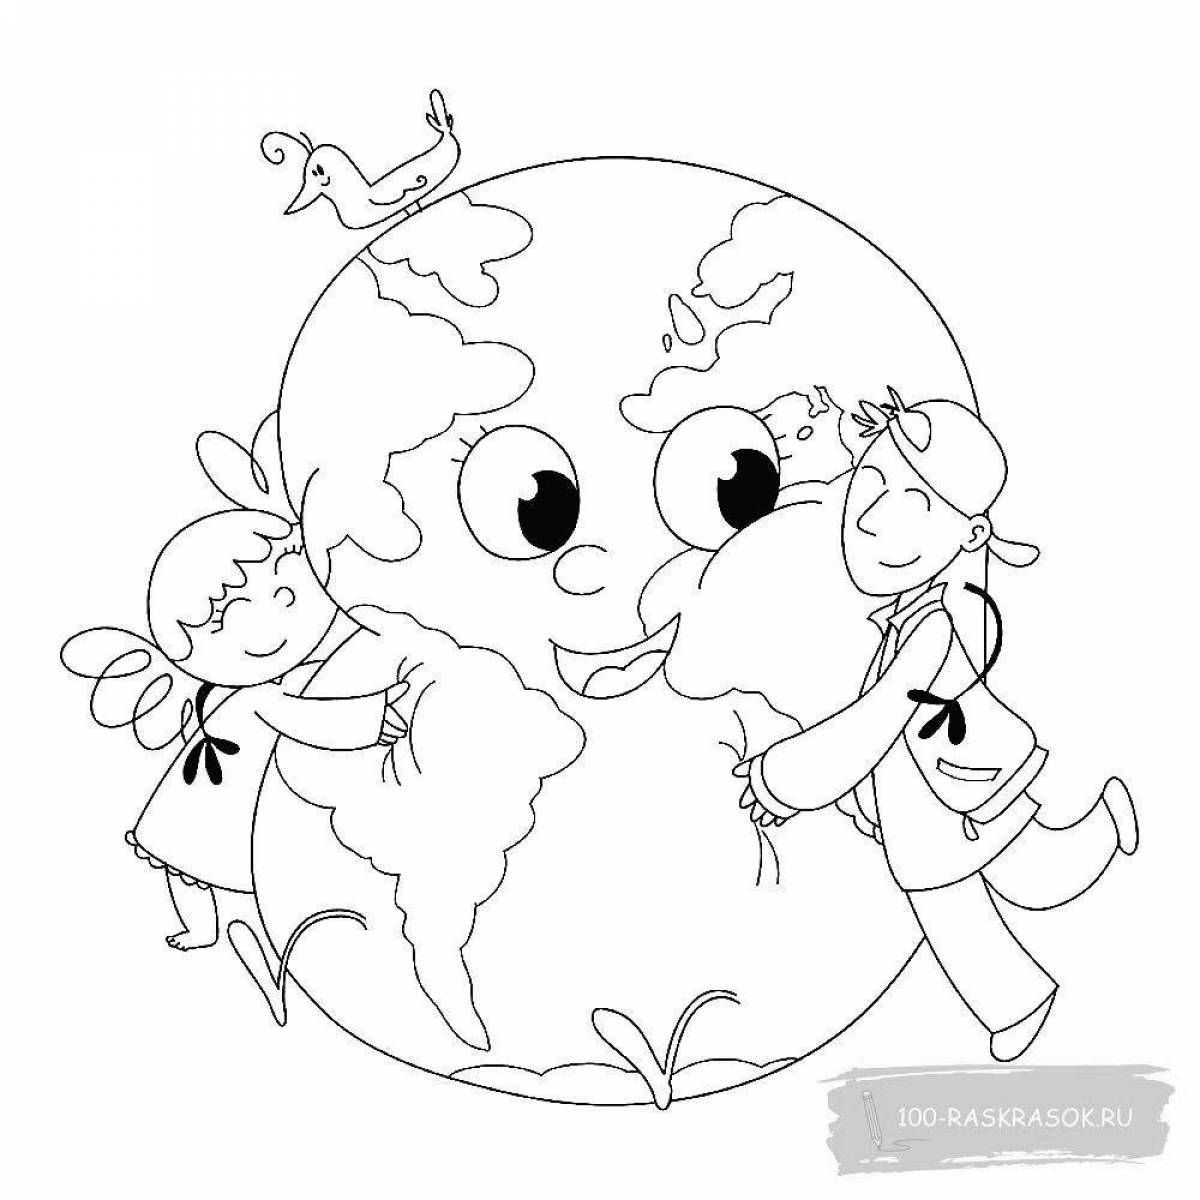 Adorable eco coloring book for kids